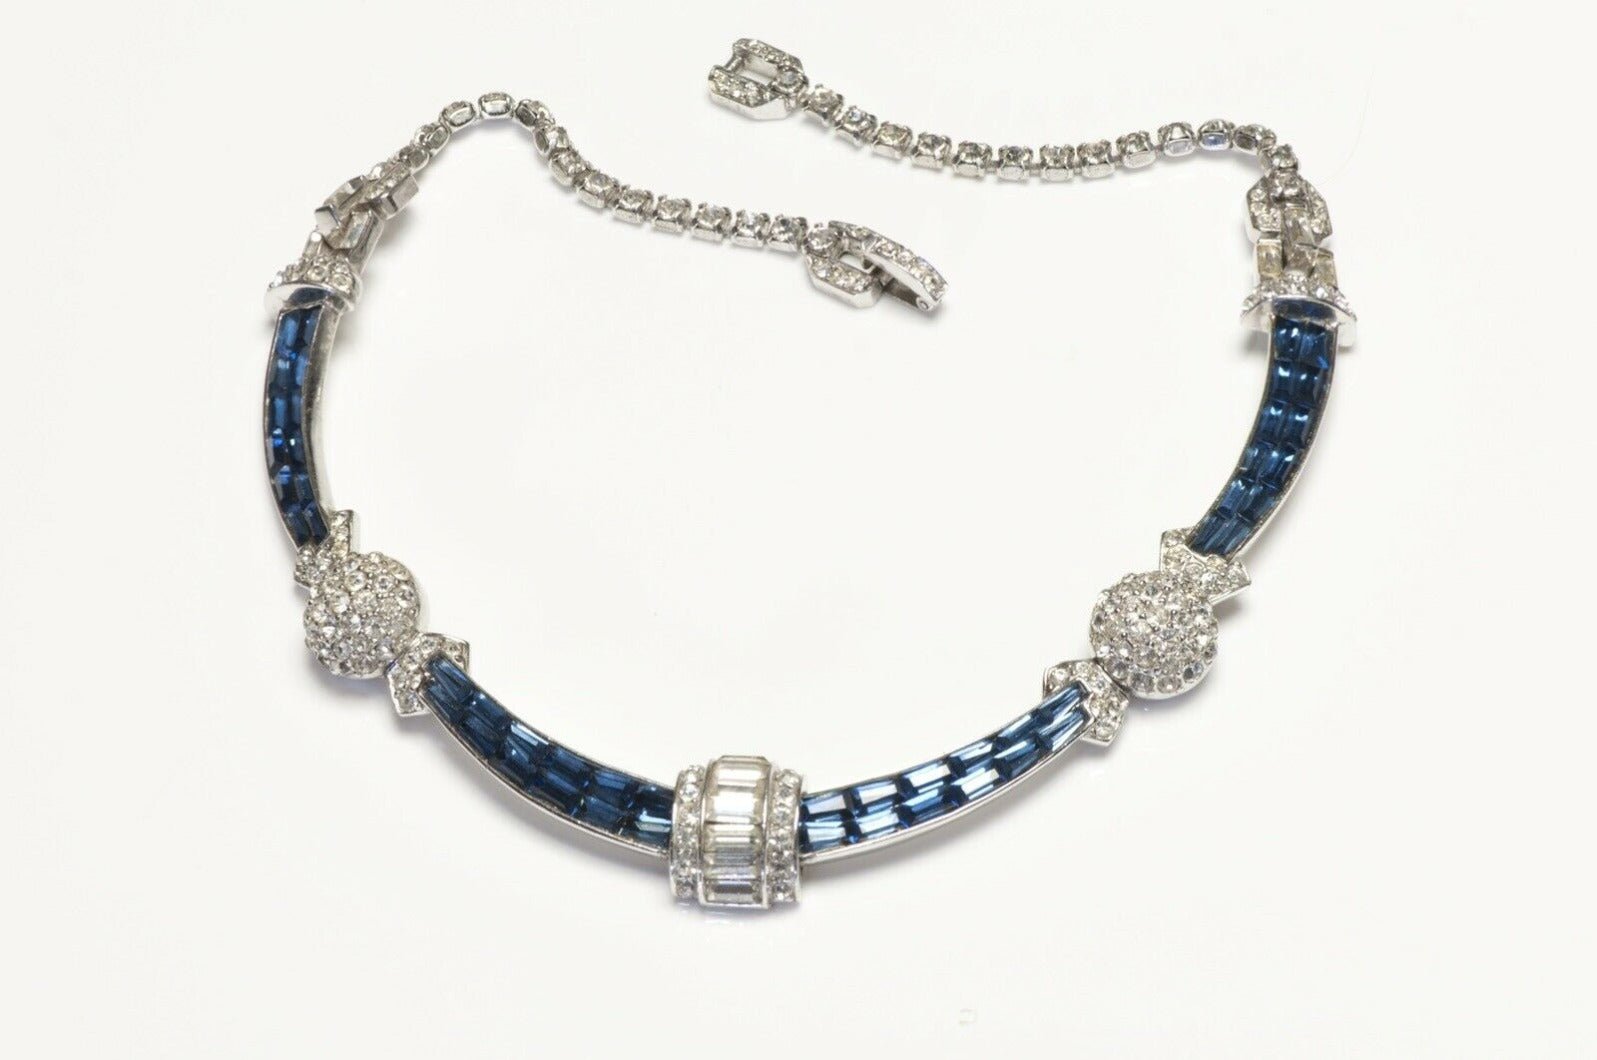 Vintage 1950’s Marcel Boucher Rhodium Plated Blue Crystal Collar Necklace